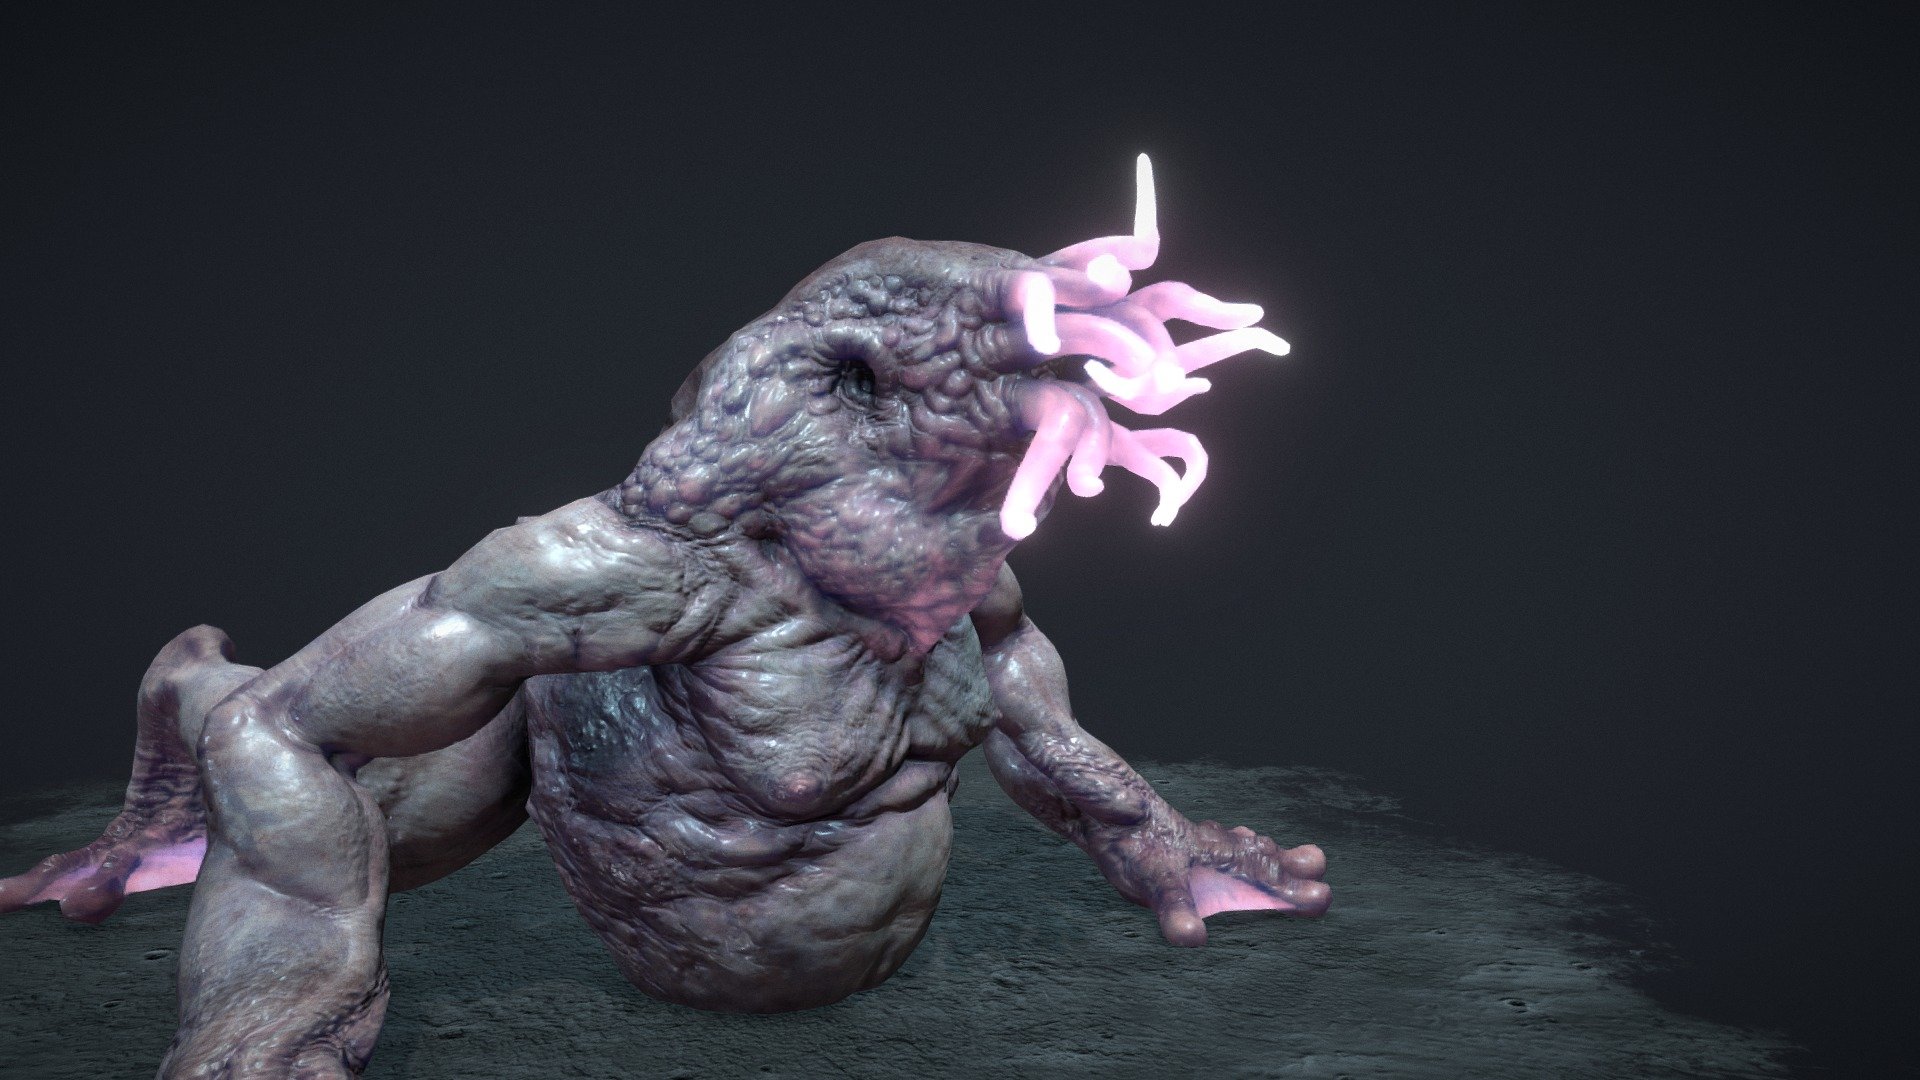 Here is my game res interpretation of a Moonbeast, creature of the Dreamlands created by H.P. Lovecraft.
Textured in substance painter and designer.

Hope you enjoy ! - H.P. Lovecraft's Moonbeast - 3D model by dunkel_kind 3d model